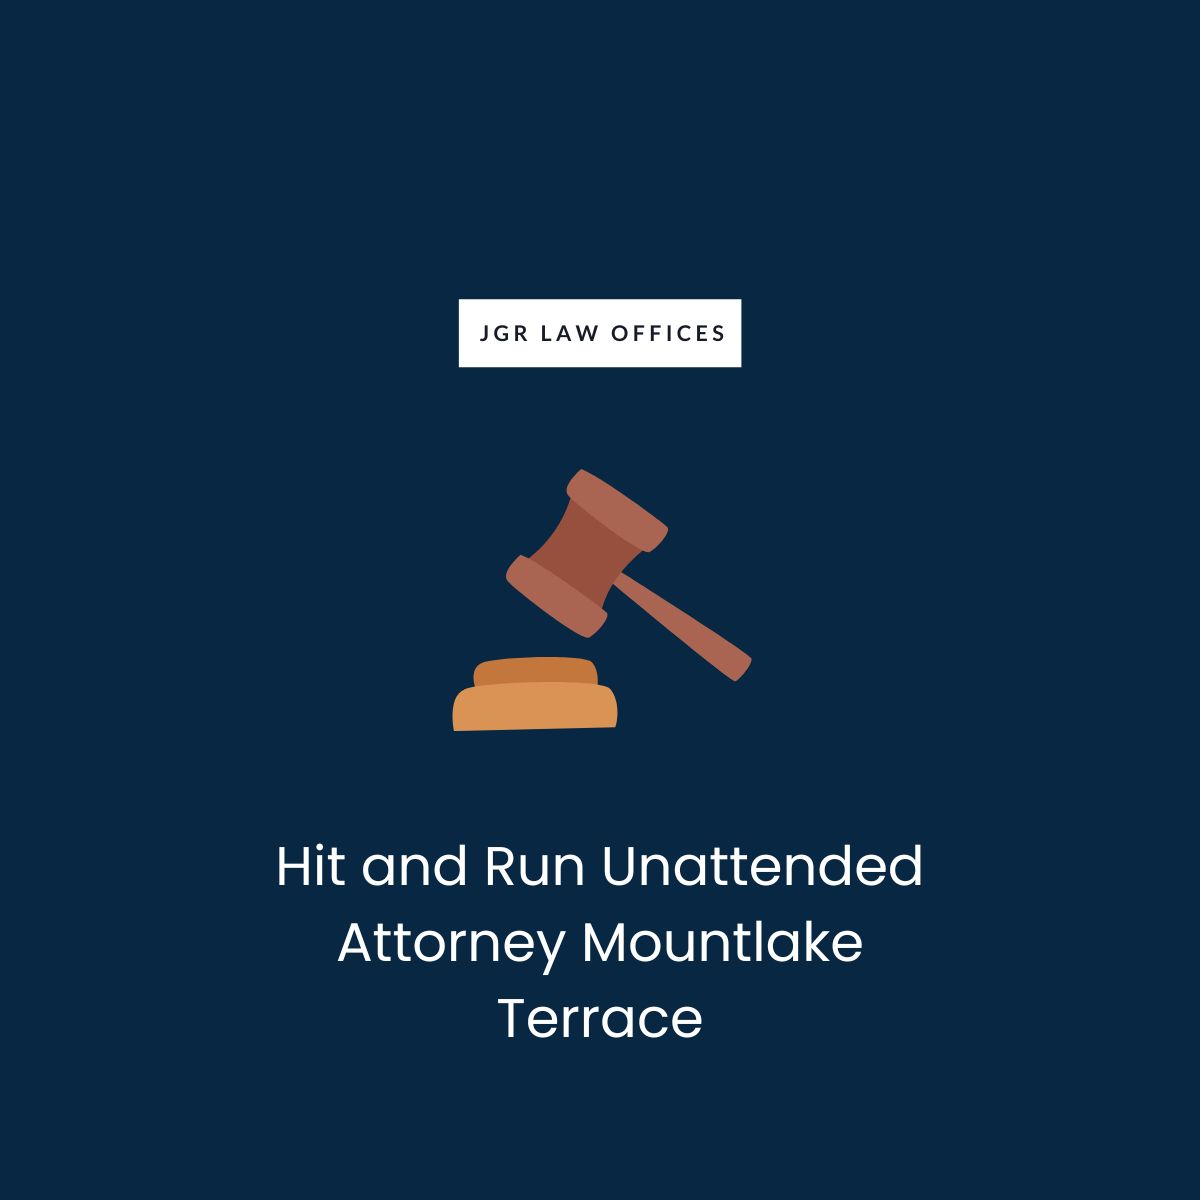 Hit and Run Unattended Attorney Mountlake Terrace